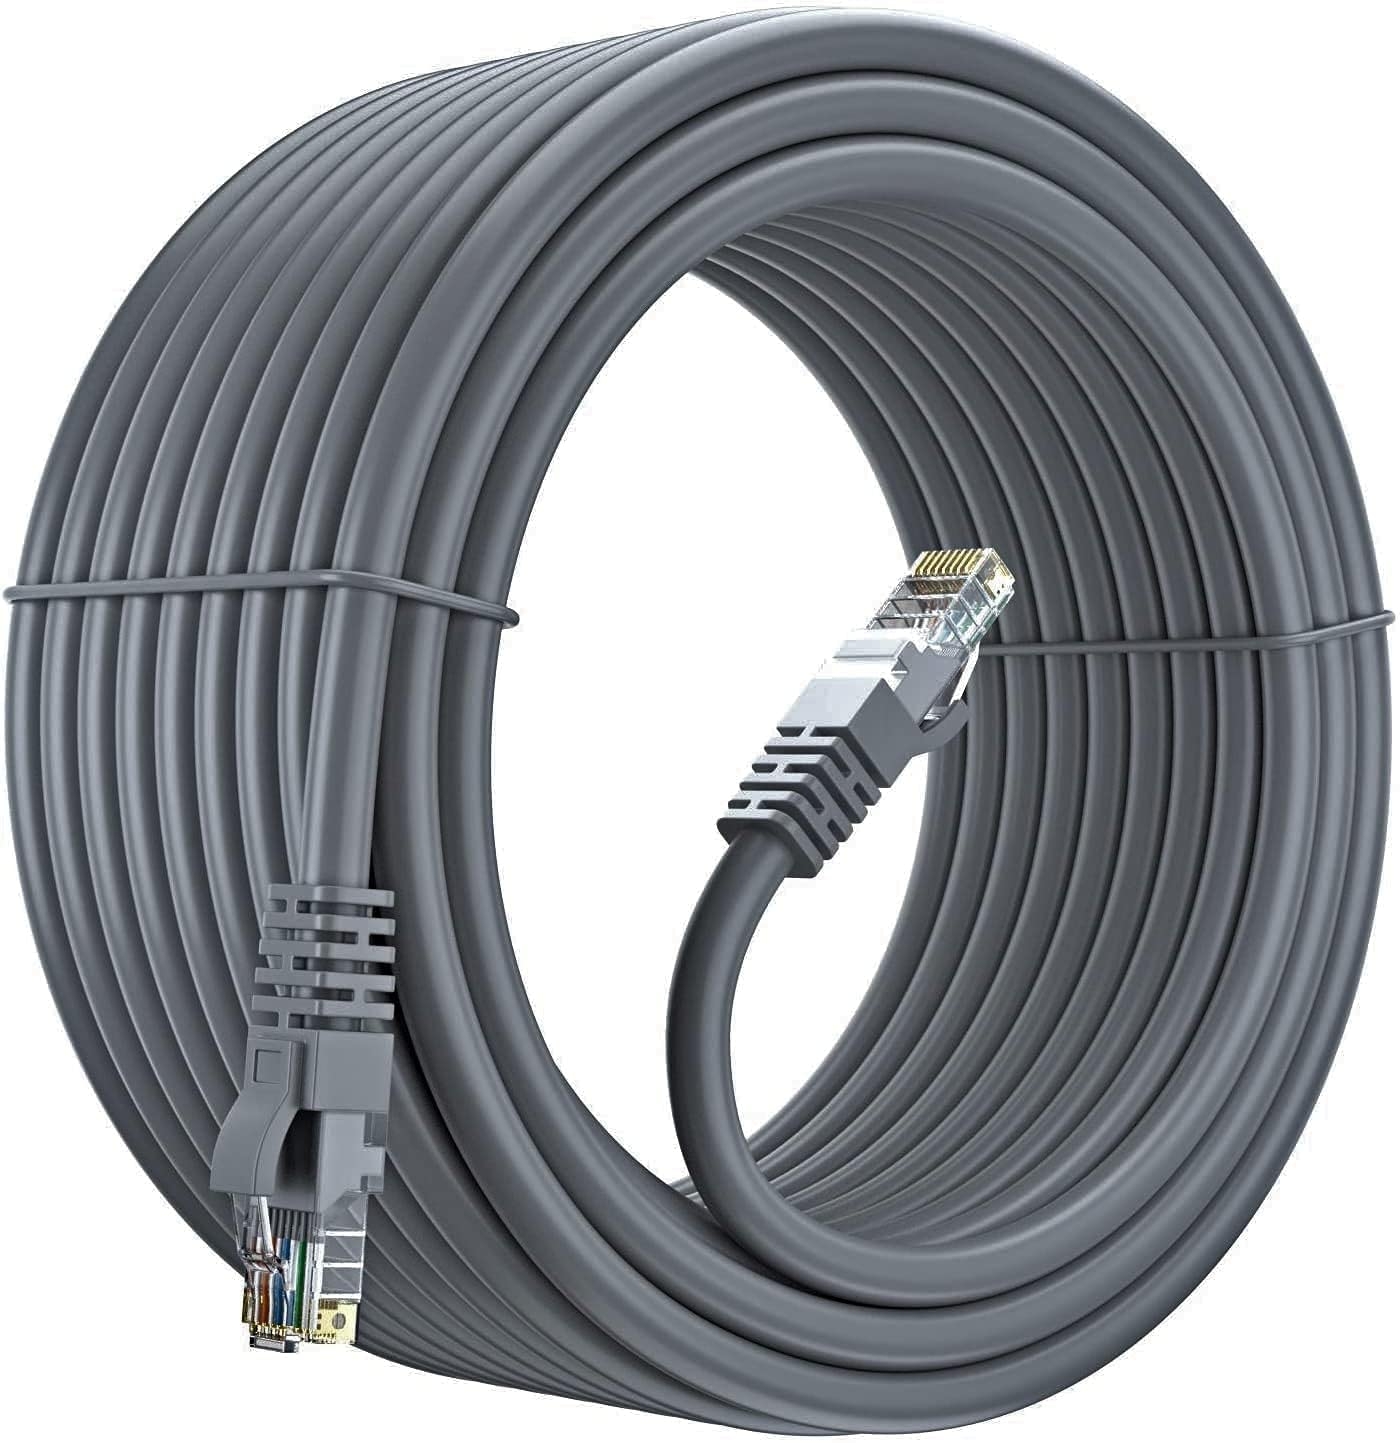 MVTECH 25M Cat6 Outdoor Cable Weatherproof/UV Resistant 1000mbps Ethernet Patch LAN Cable for Direct Burial Installations